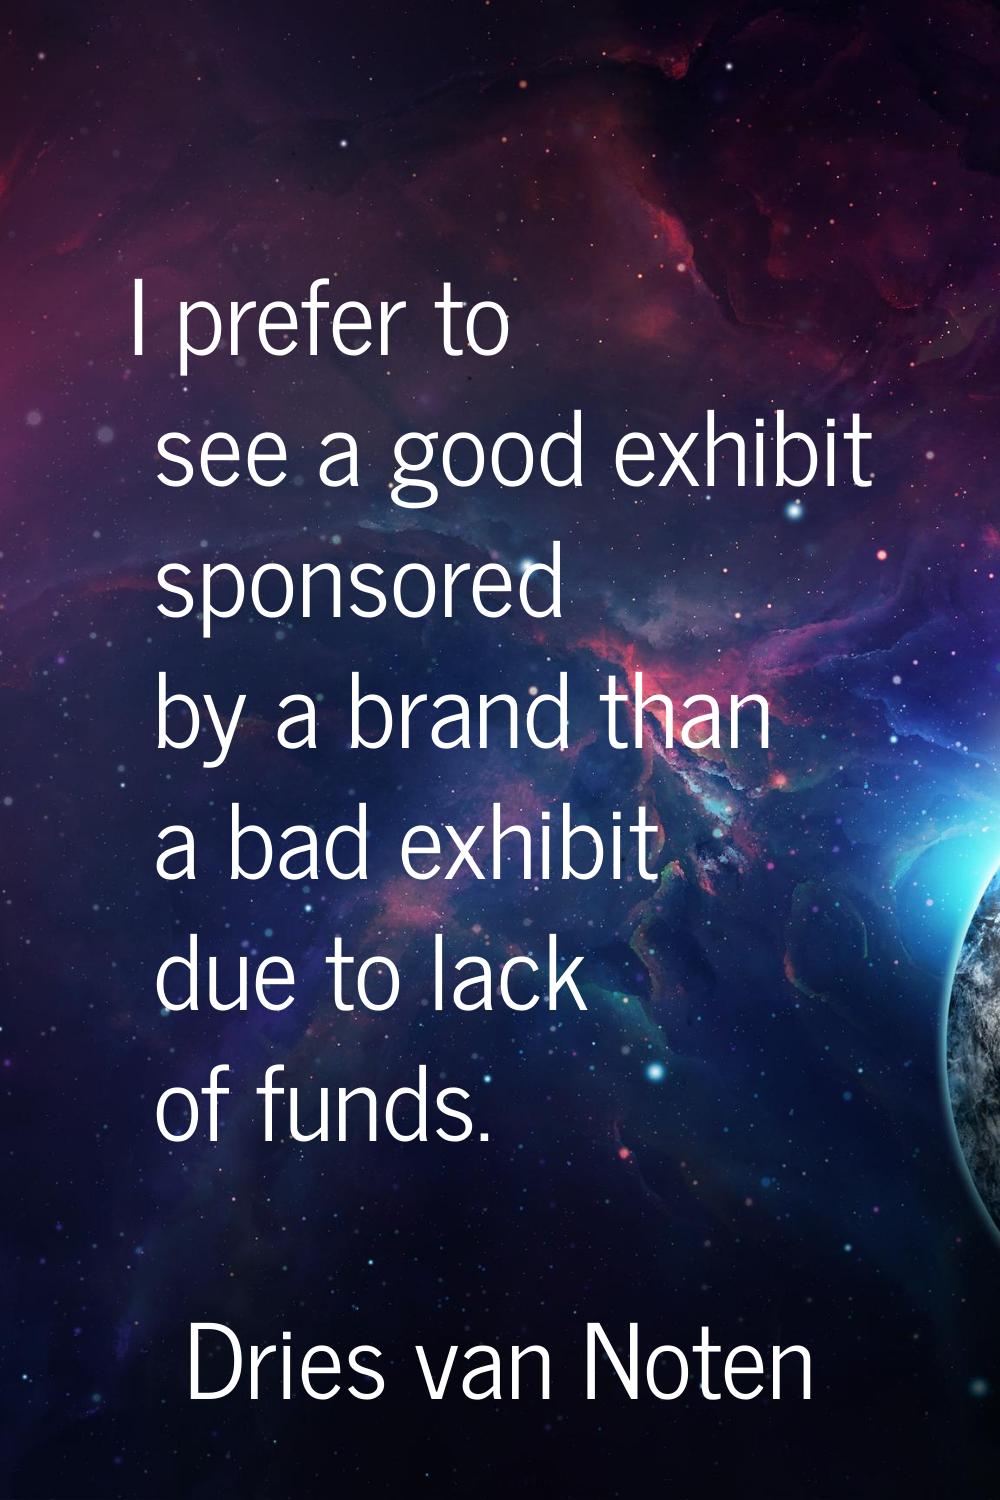 I prefer to see a good exhibit sponsored by a brand than a bad exhibit due to lack of funds.